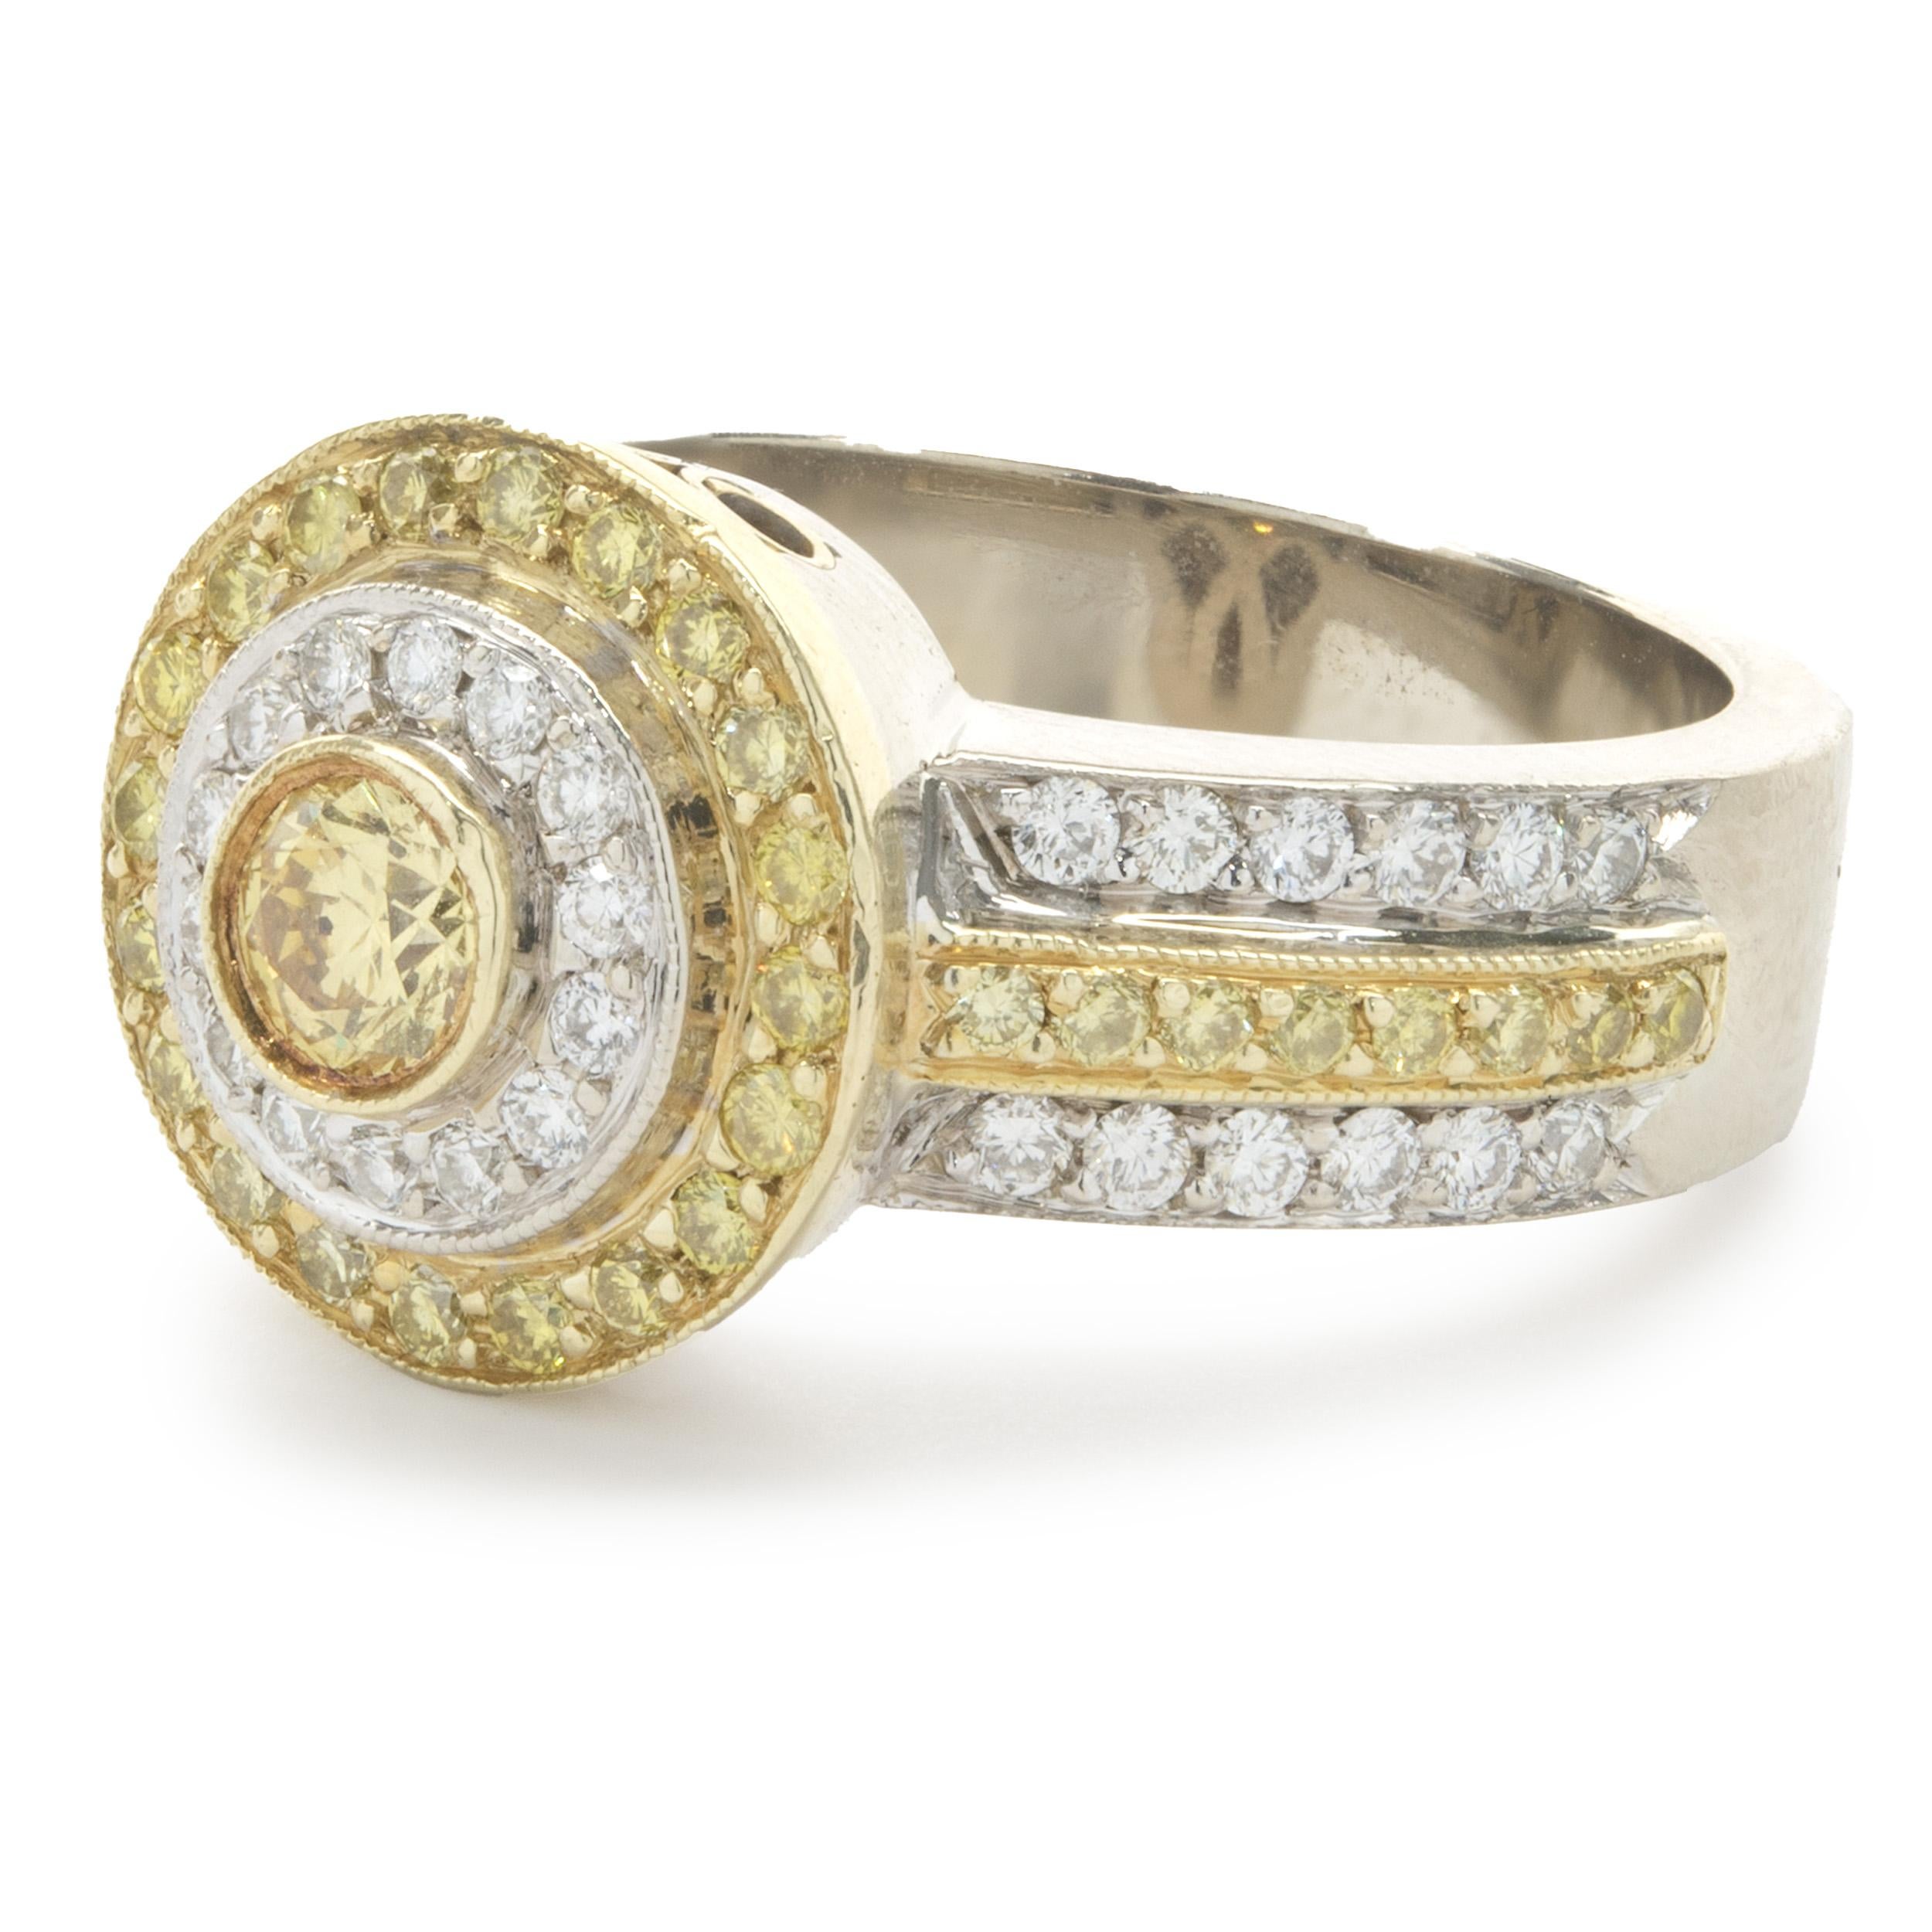 Uneek 18 Karat Yellow and White Gold Fancy Yellow and White Diamond Layered Ring In Excellent Condition For Sale In Scottsdale, AZ